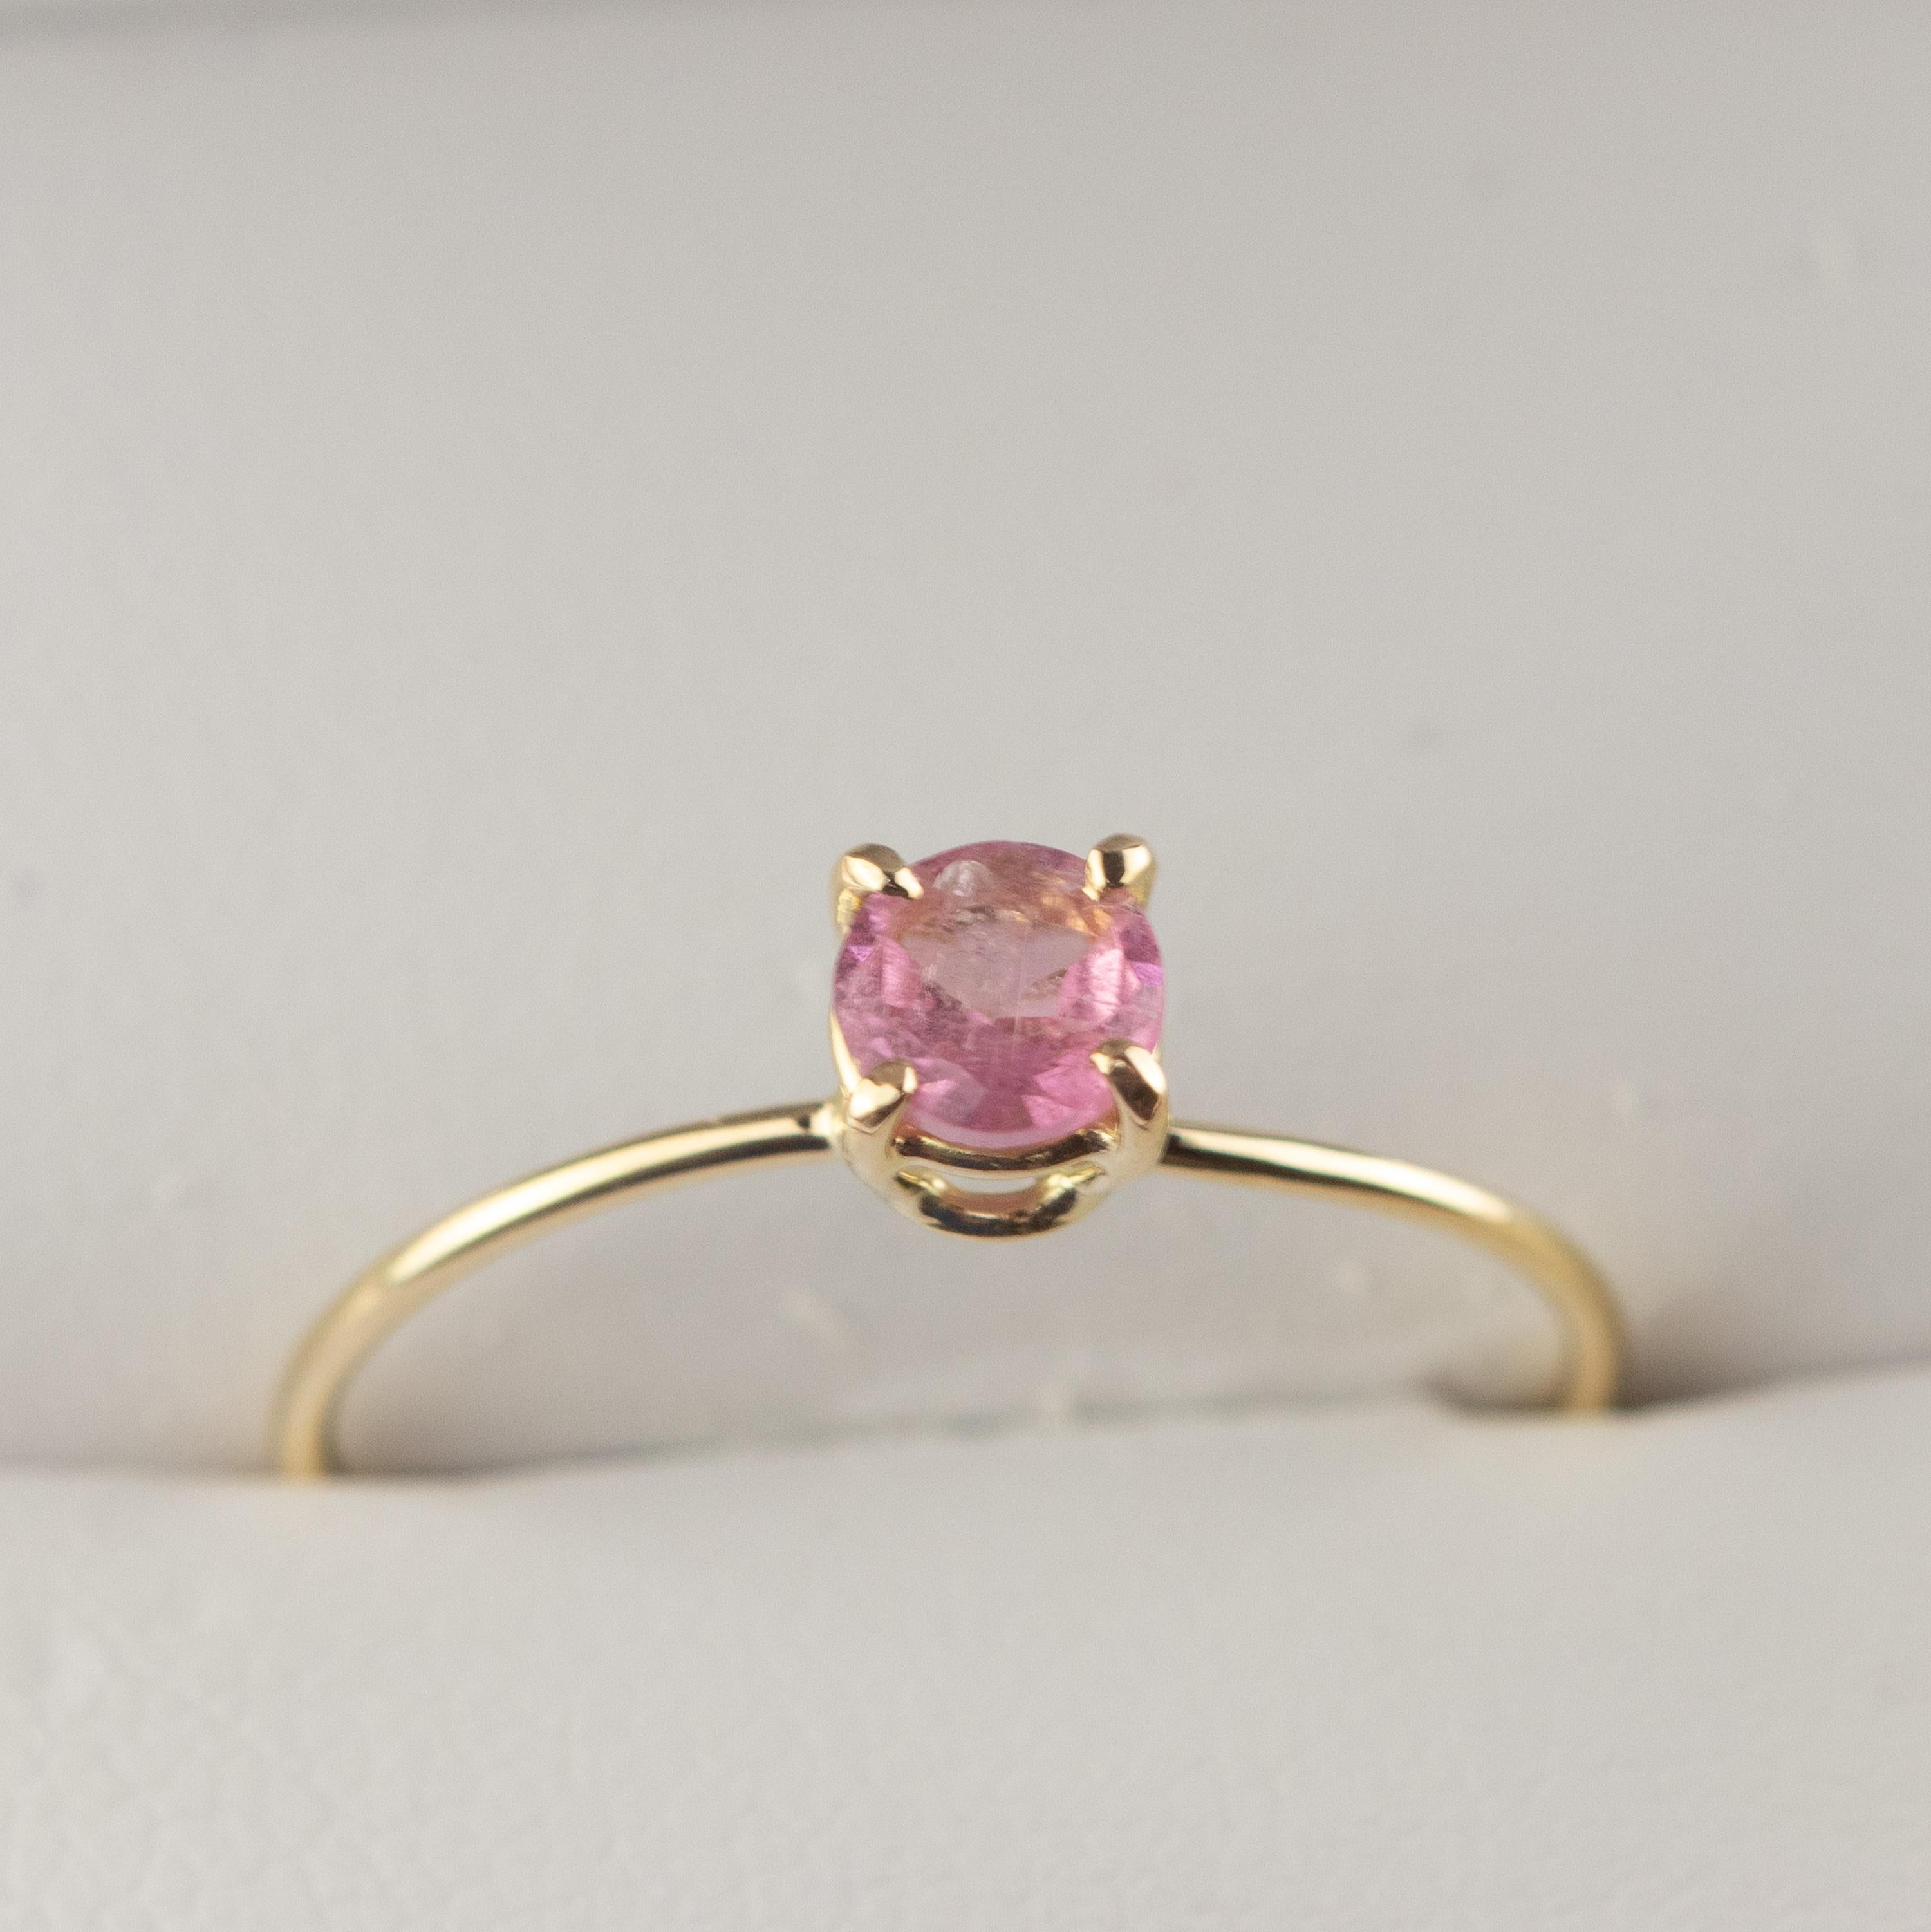 Signature INTINI Jewels pink tourmaline jewellery. Modern and elegant ring design in 9k yellow gold with an brilliant cut with tiny griffes sormounting the ring. Handmade, delicate and modern chic ring.

Pink Tourmaline is a gemstone that can break